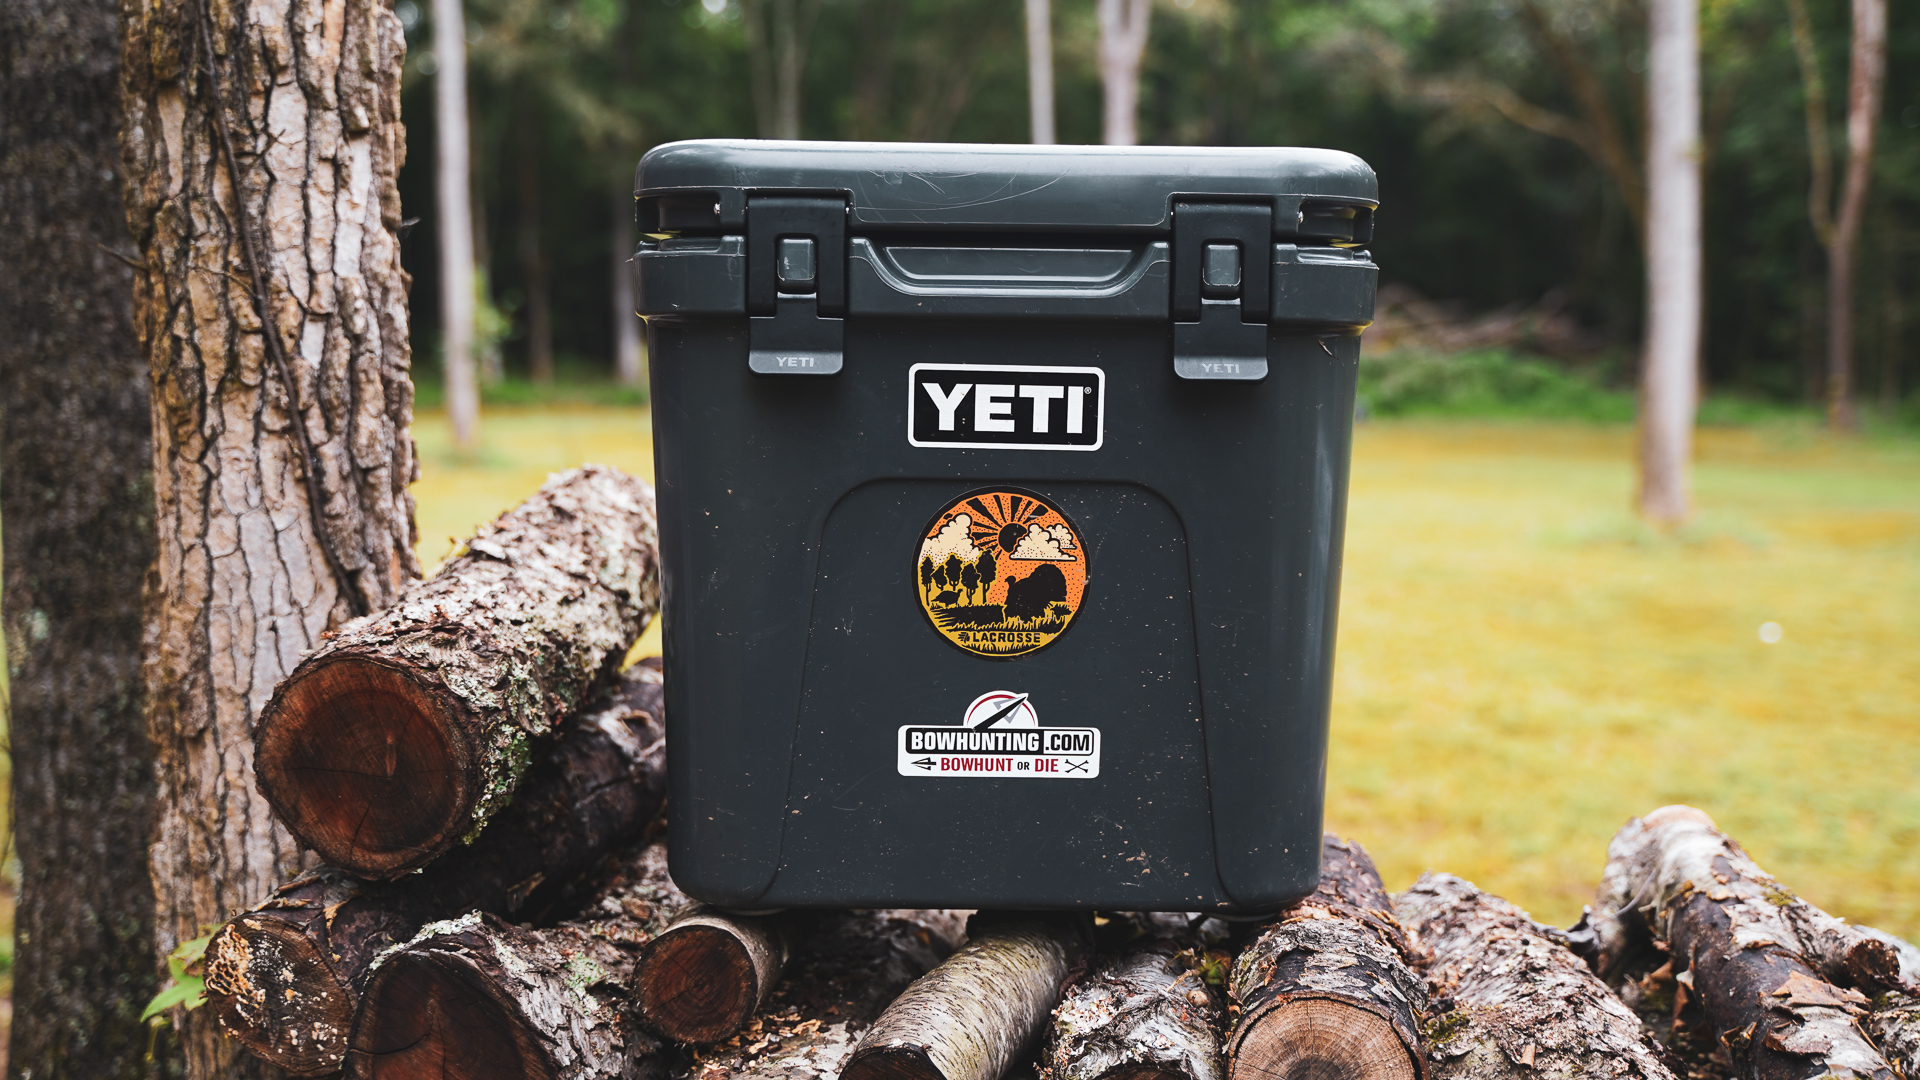 https://www.bowhunting.com/wp-content/uploads/2020/09/Yeti-Feature-2.jpg